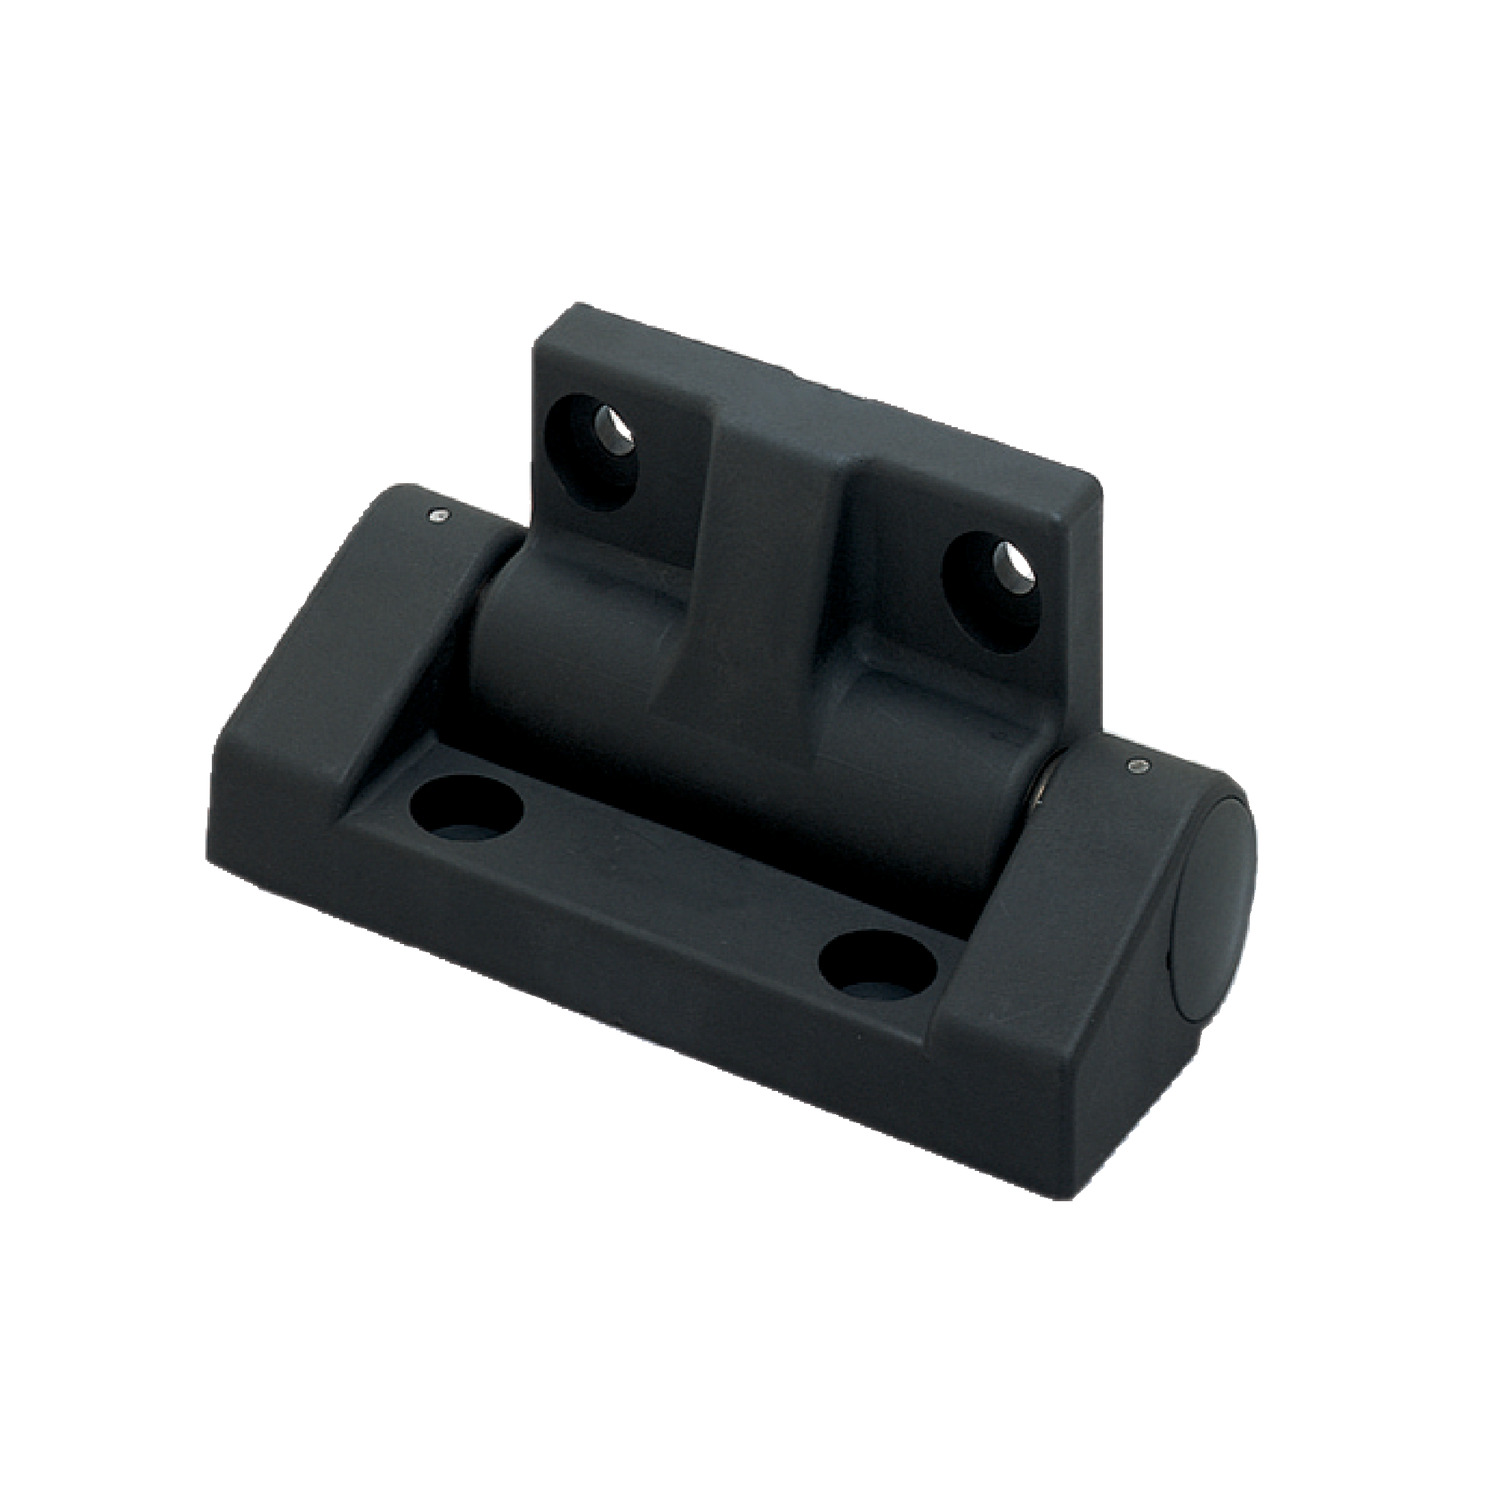 Product Q1002, Soft Closing Hinge - Complete with torque dampers - 115° operating angle / 